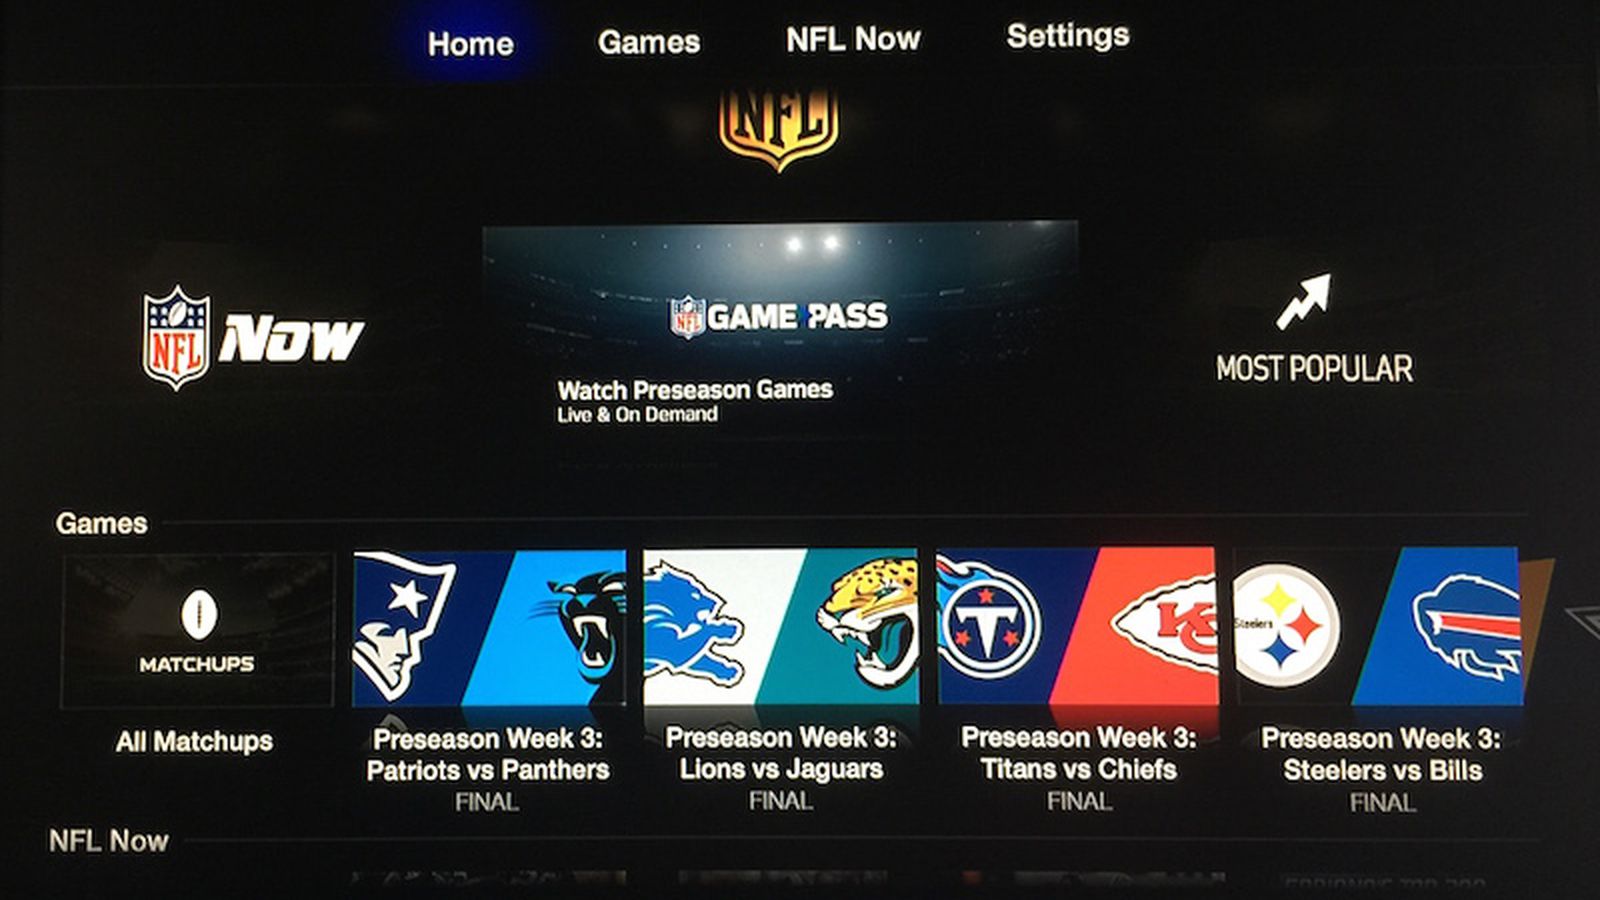 Apple TV Gains Updated NFL Channel With Game Pass Integration - MacRumors